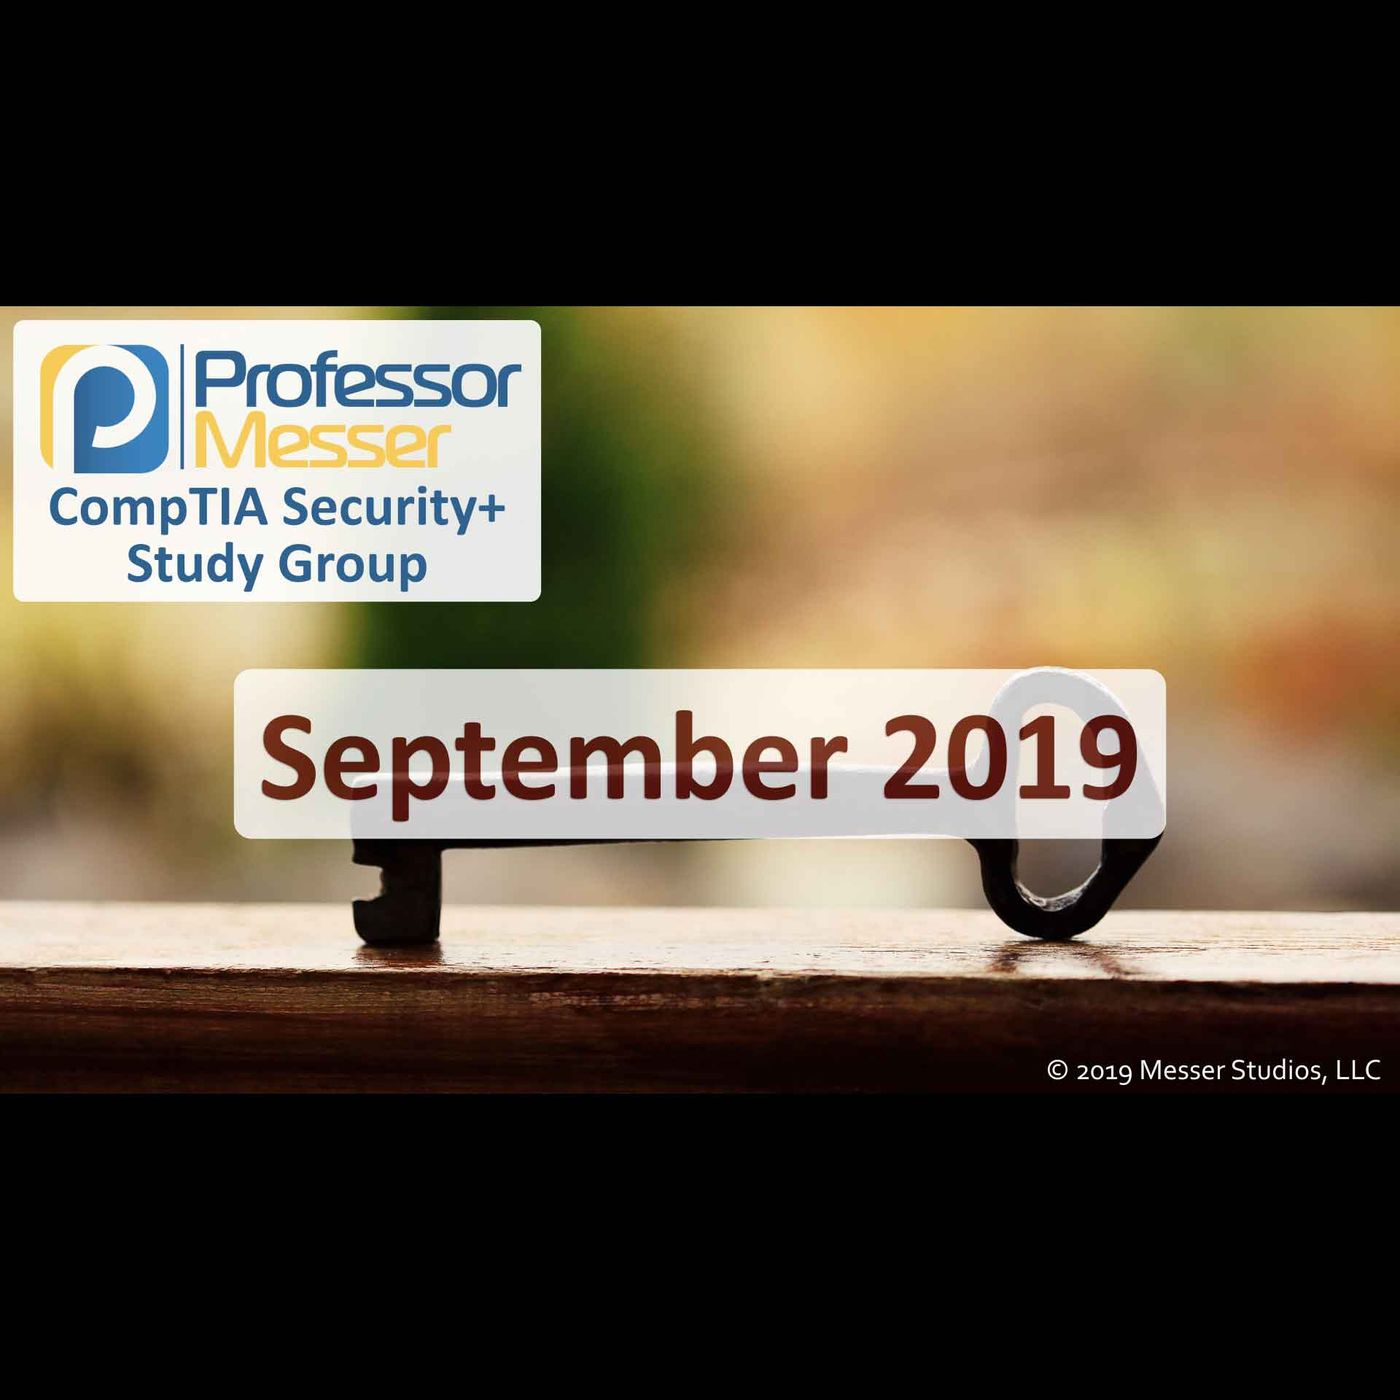 Professor Messer's Security+ Study Group After Show - September 2019